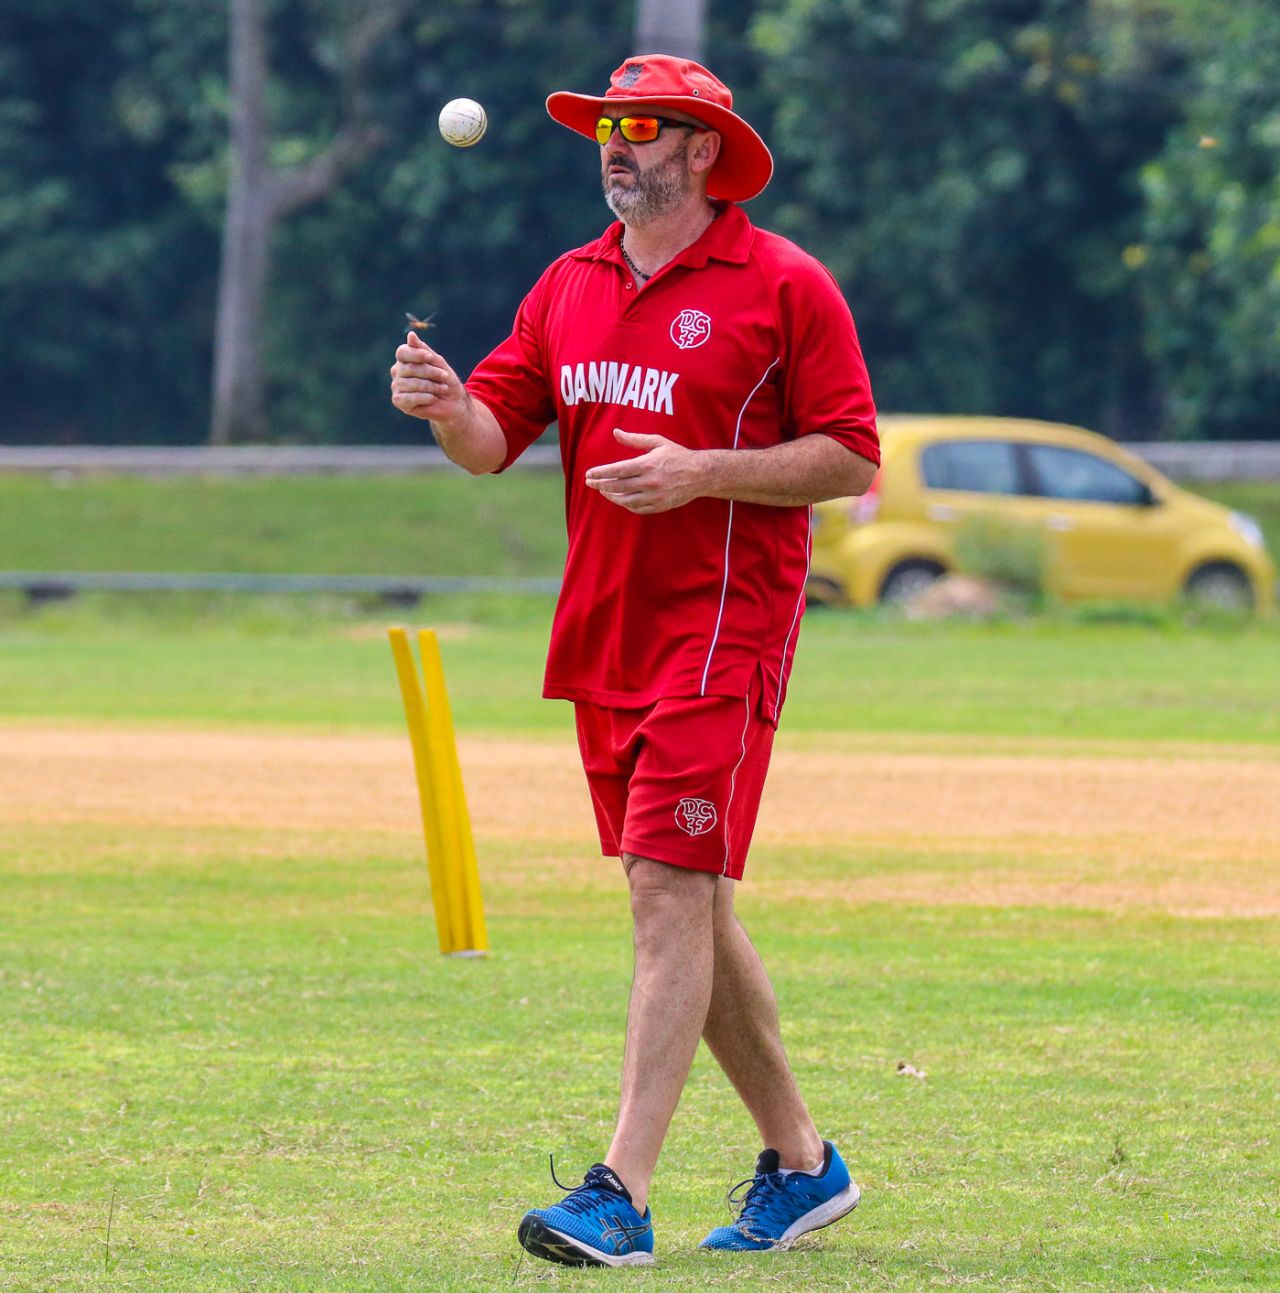 Denmark coach Jeremy Bray flicks a ball in the air as he gets set to begin warmups, Denmark v Malaysia, ICC World Cricket League Division Four, Bangi, May 2, 2018